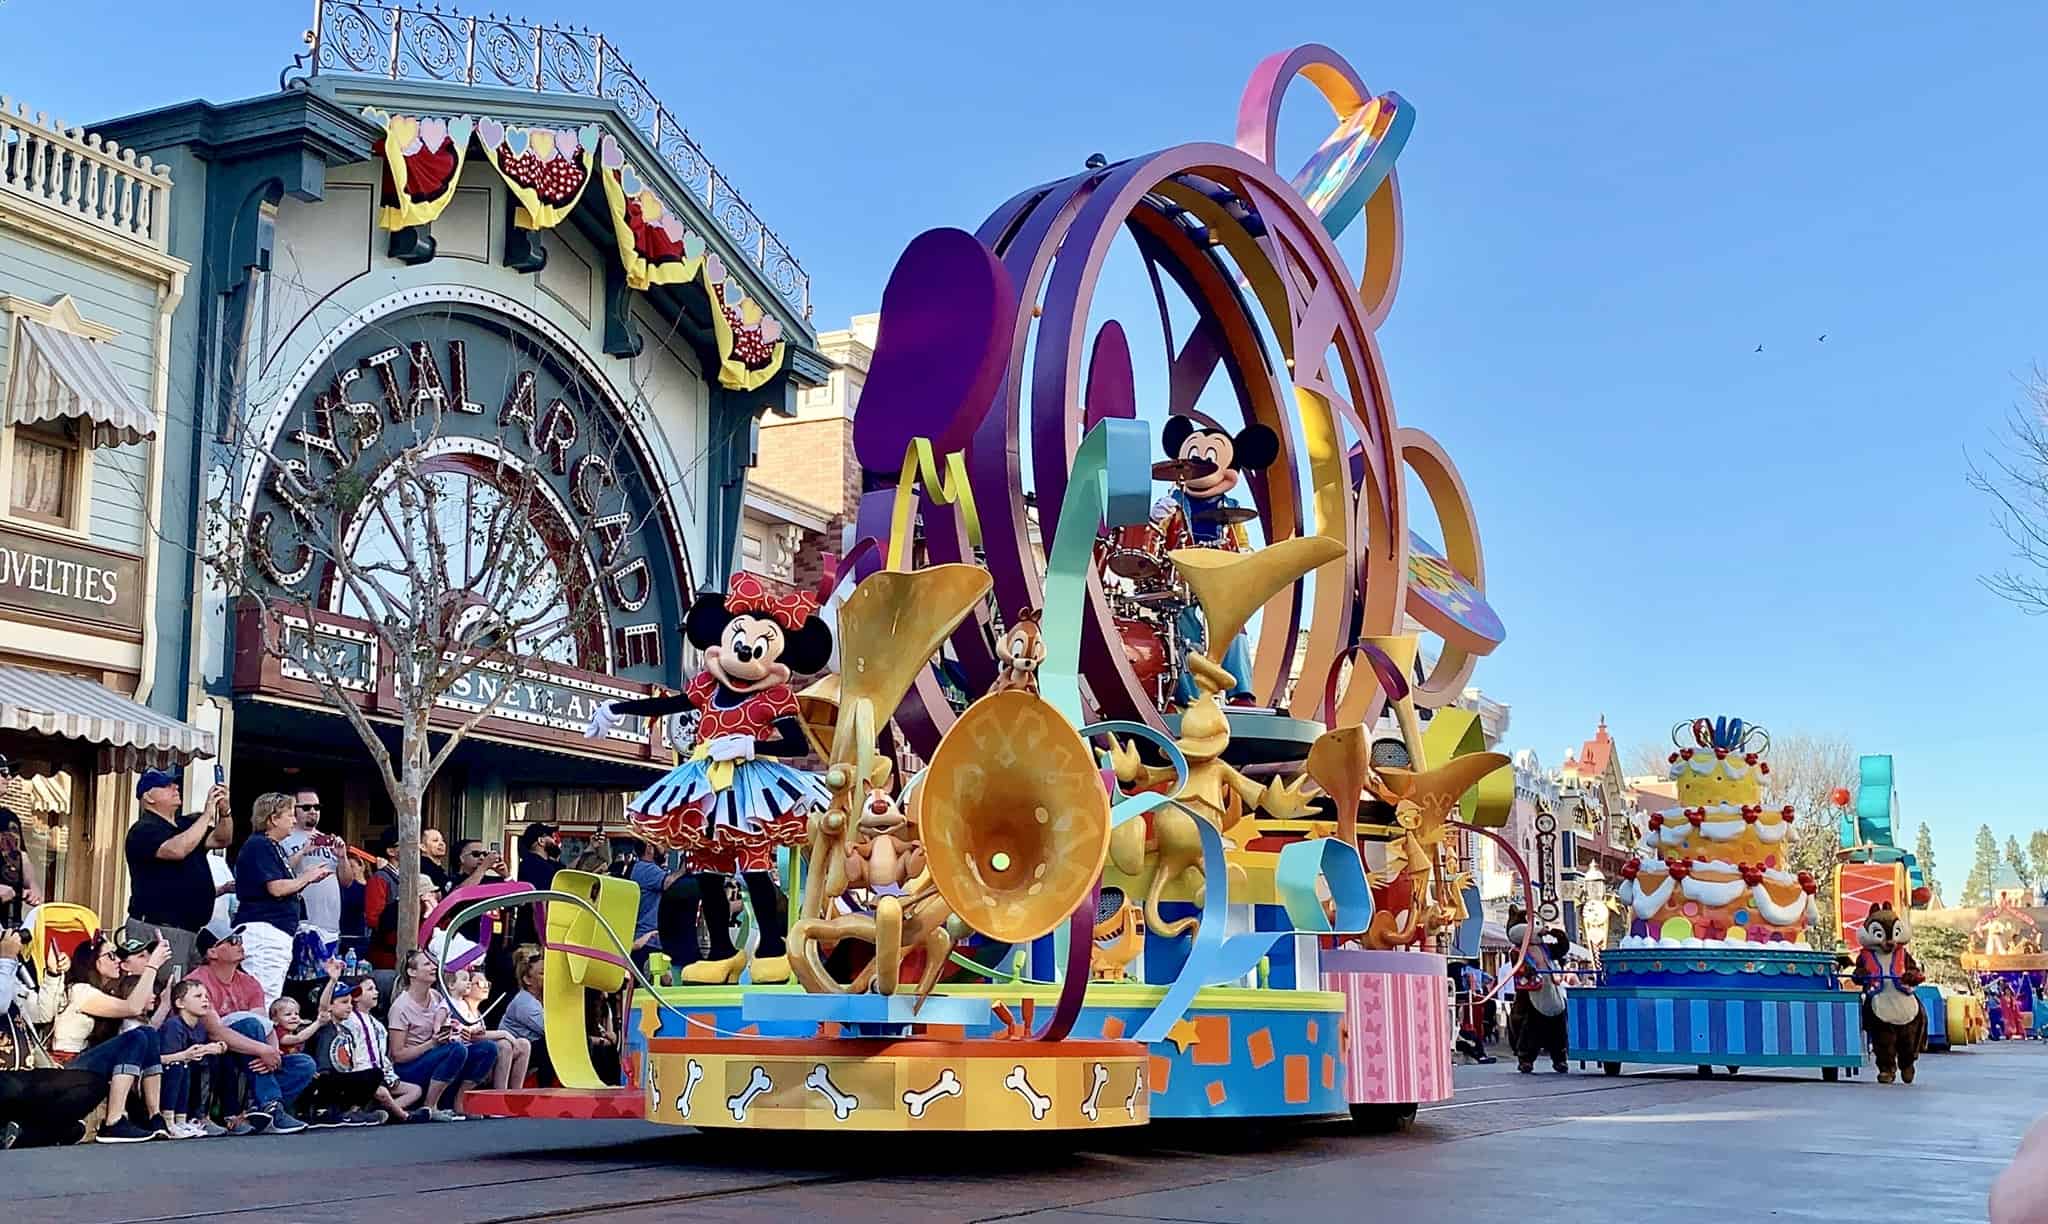 PHOTOS, VIDEO Mickey's Soundsational Parade Returns to Disneyland with